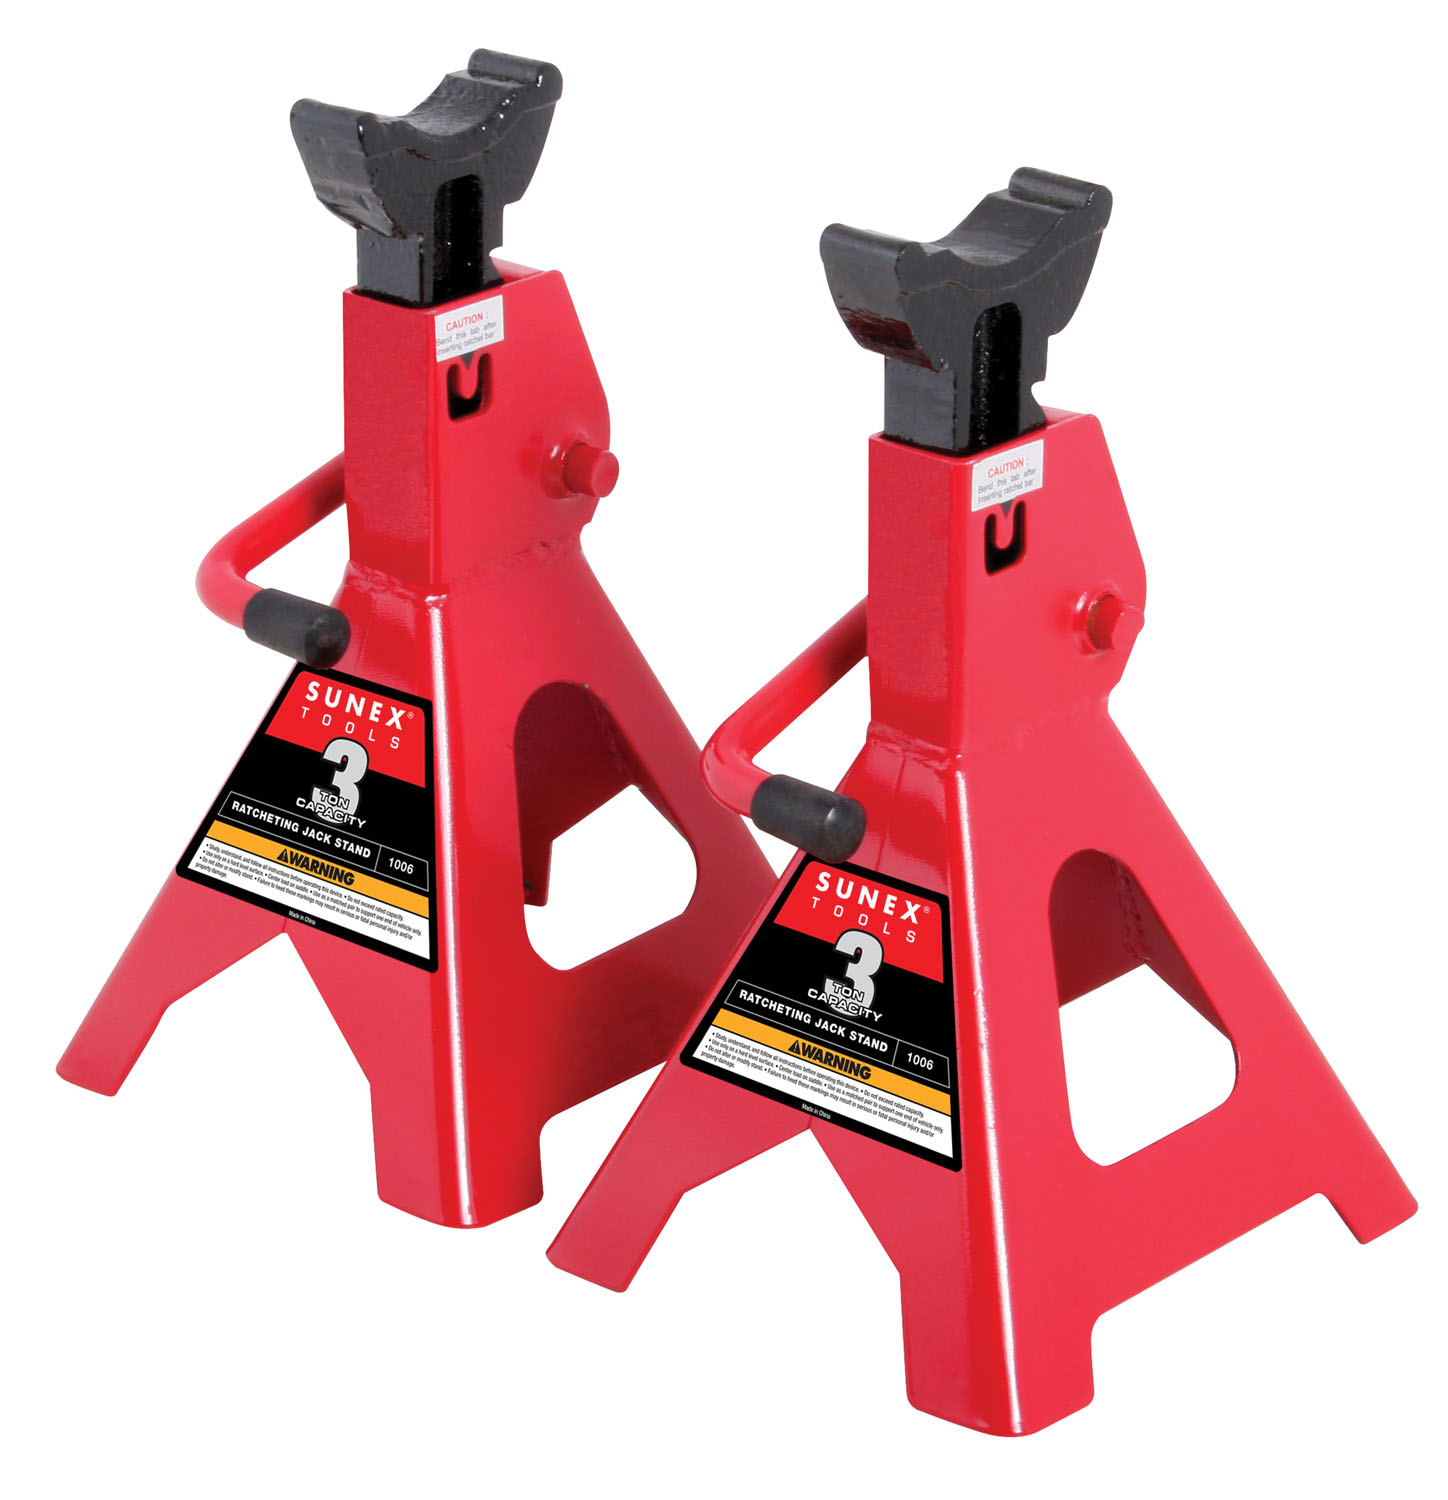 Ratcheting Jack Stands - 3 Ton Capacity